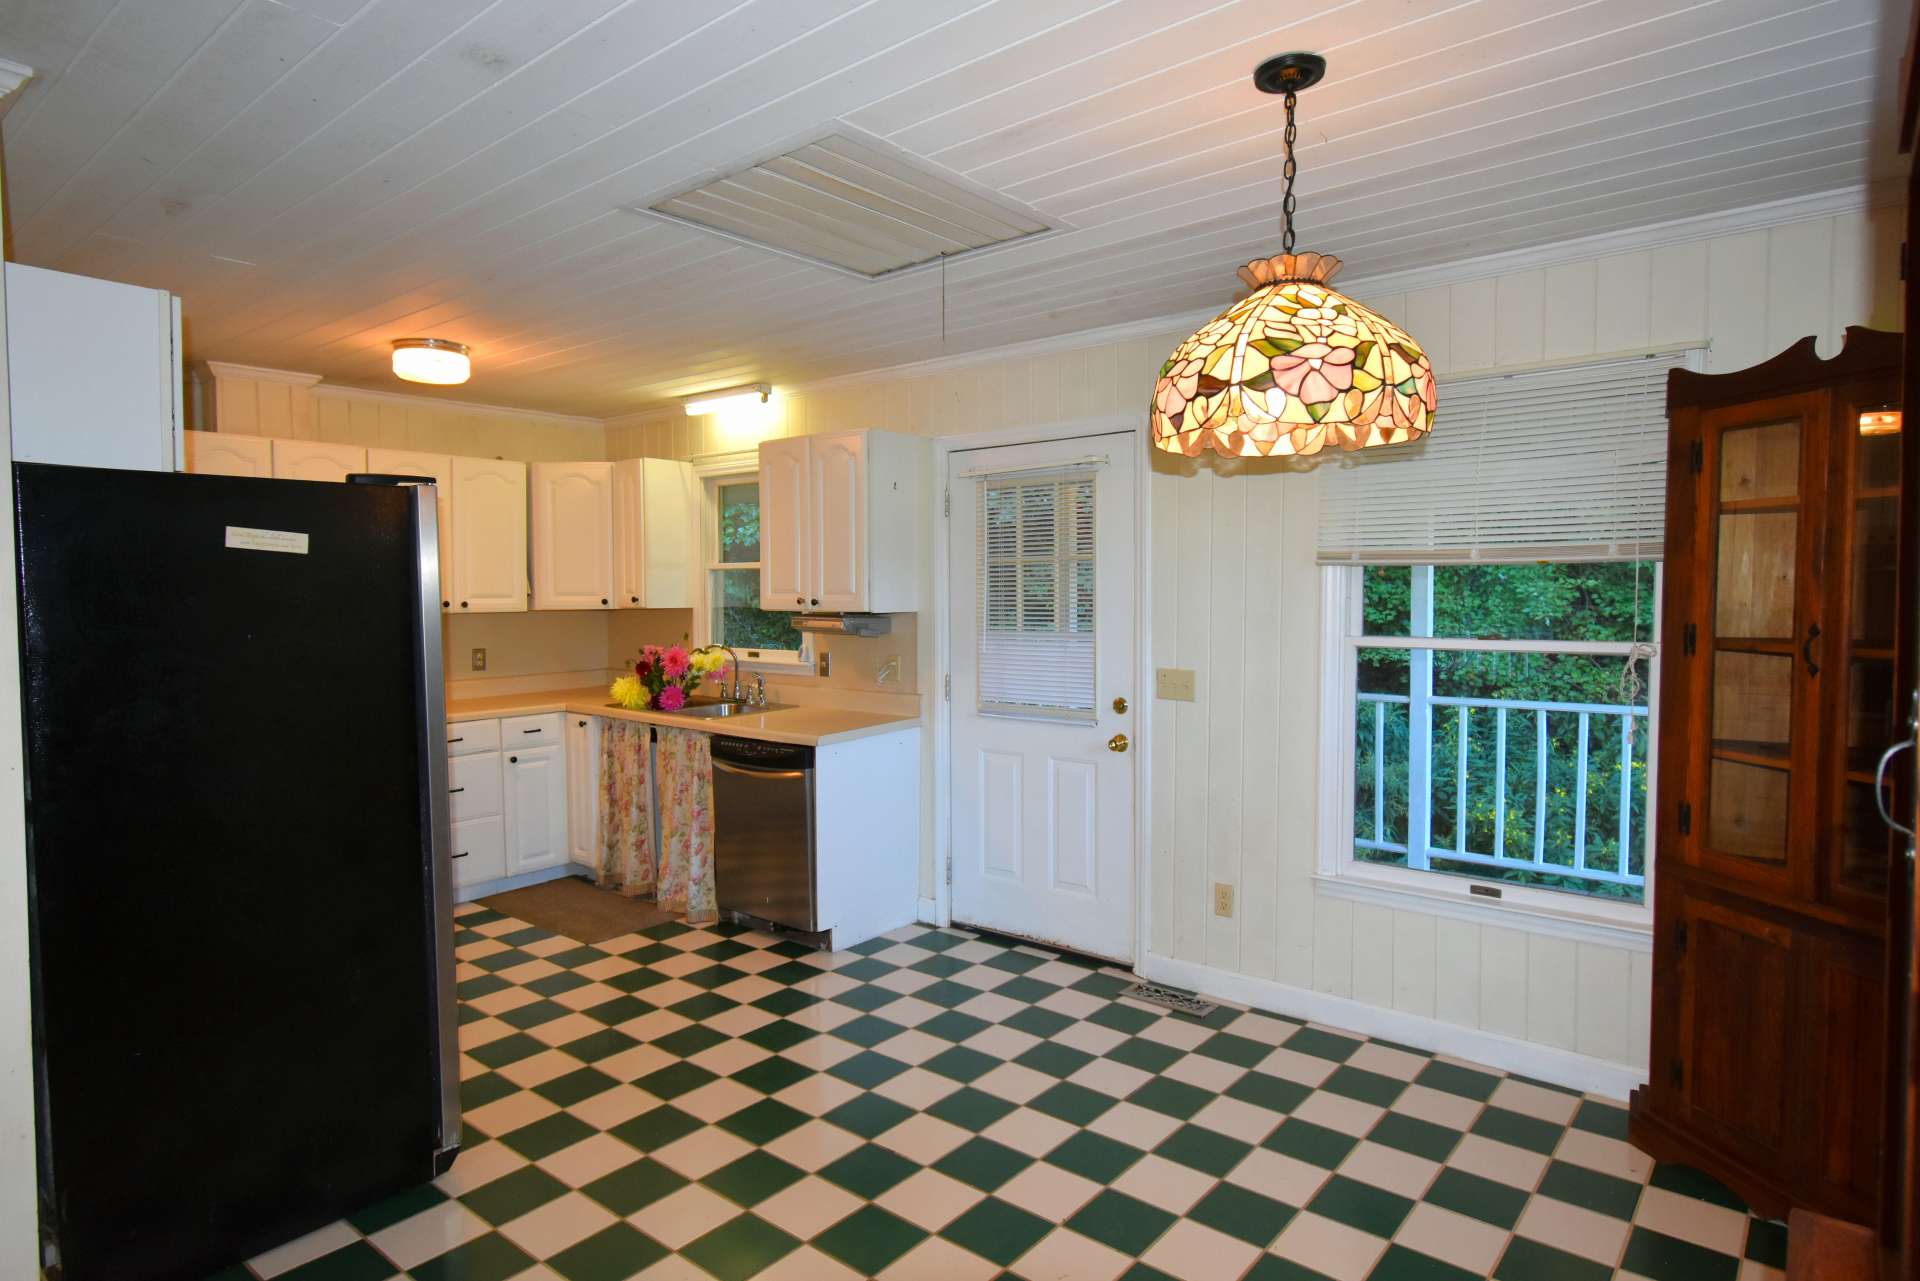 From the kitchen and dining area, you can access the full length covered back porch.